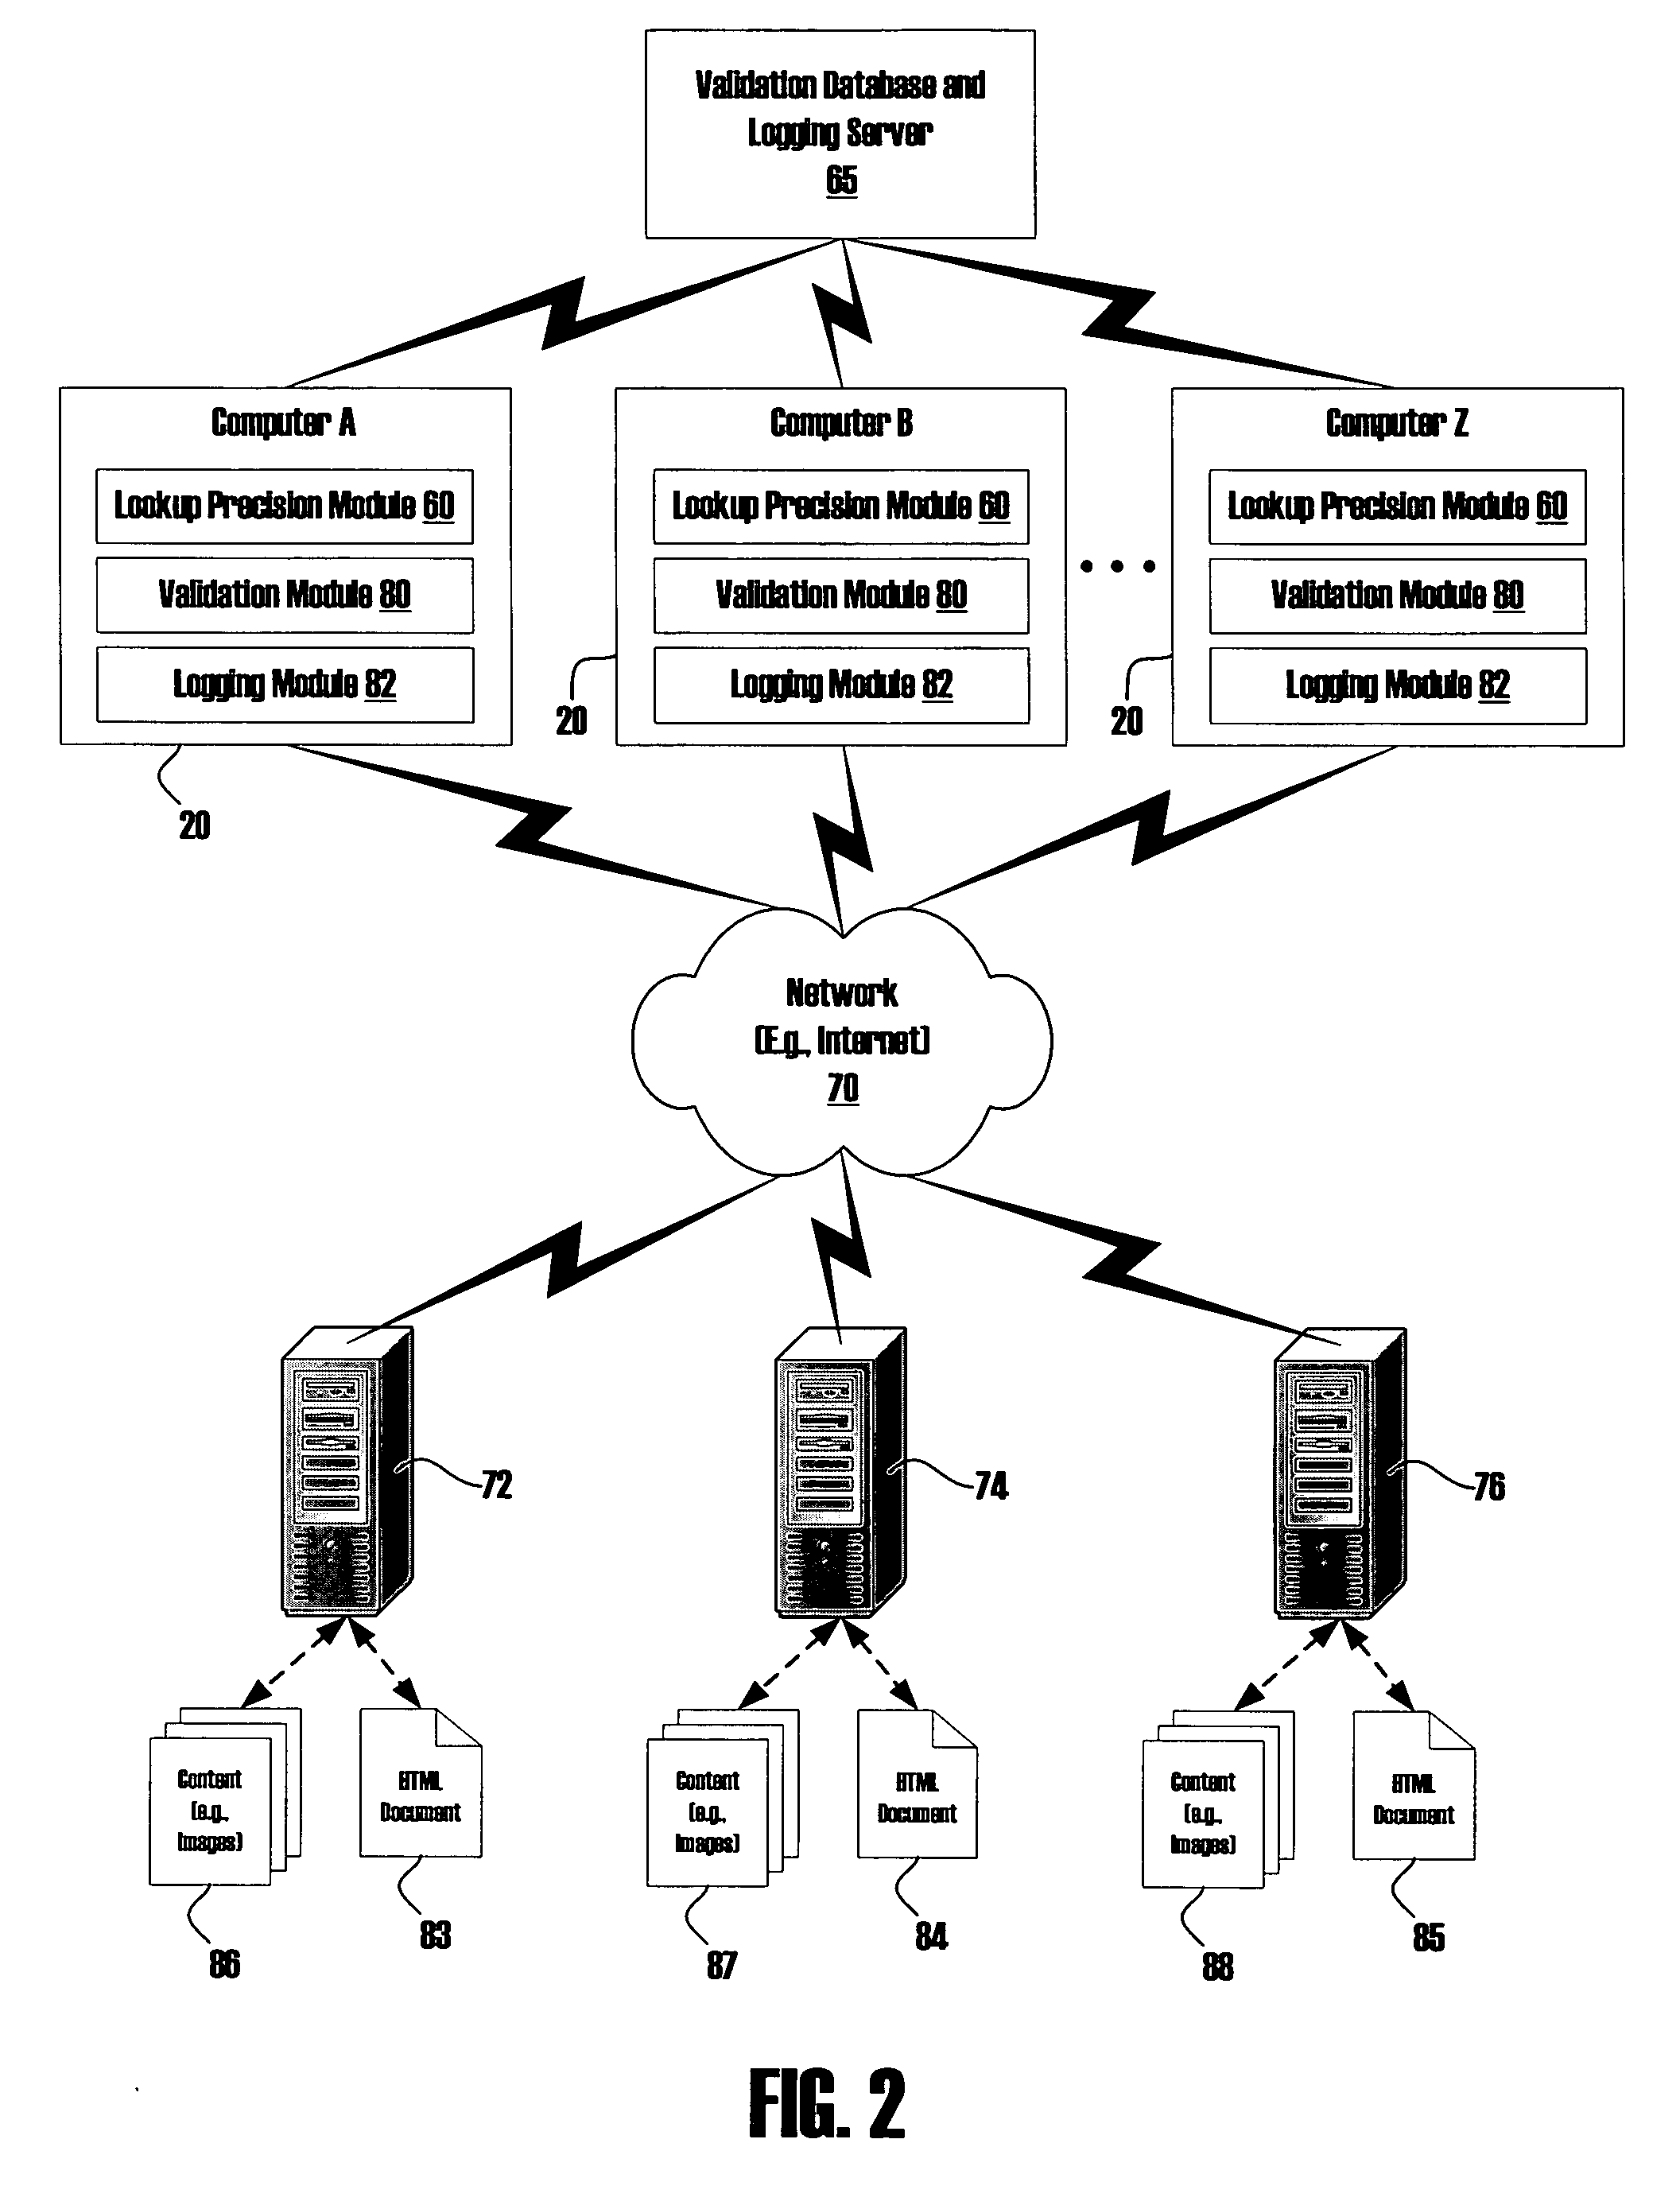 Systems, methods, and computer program products for tracking and controlling Internet use and recovering costs associated therewith